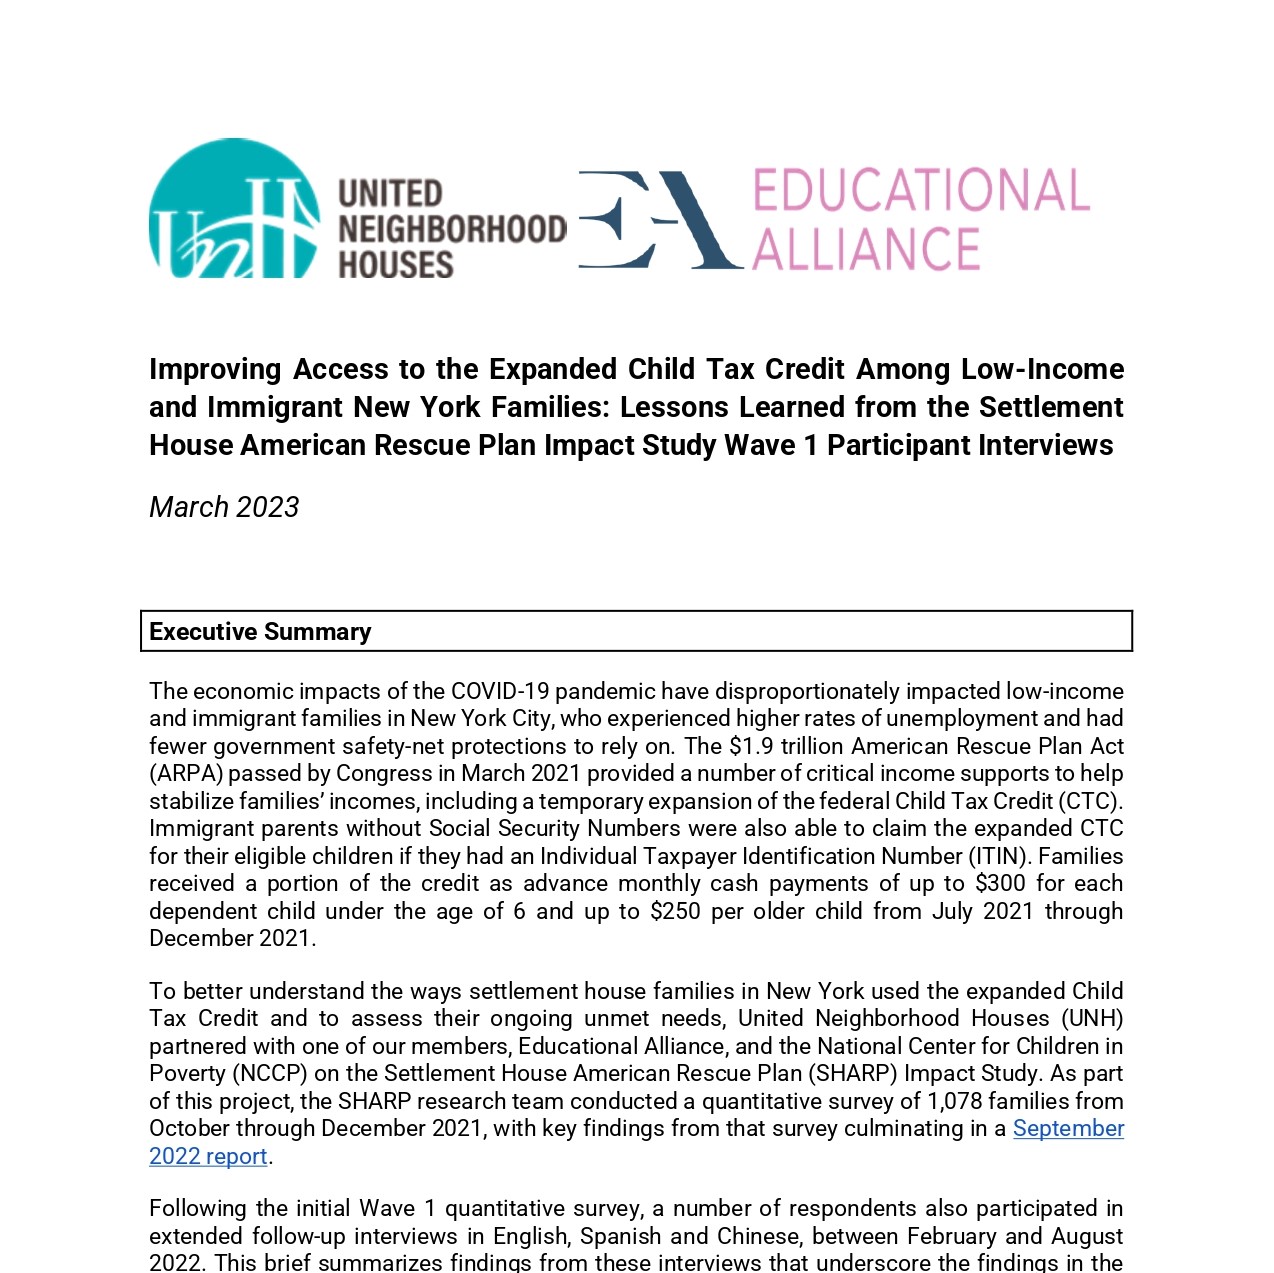 Improving Access to the Expanded Child Tax Credit Among Low-Income & Immigrant New York Families Study with Educational Alliance